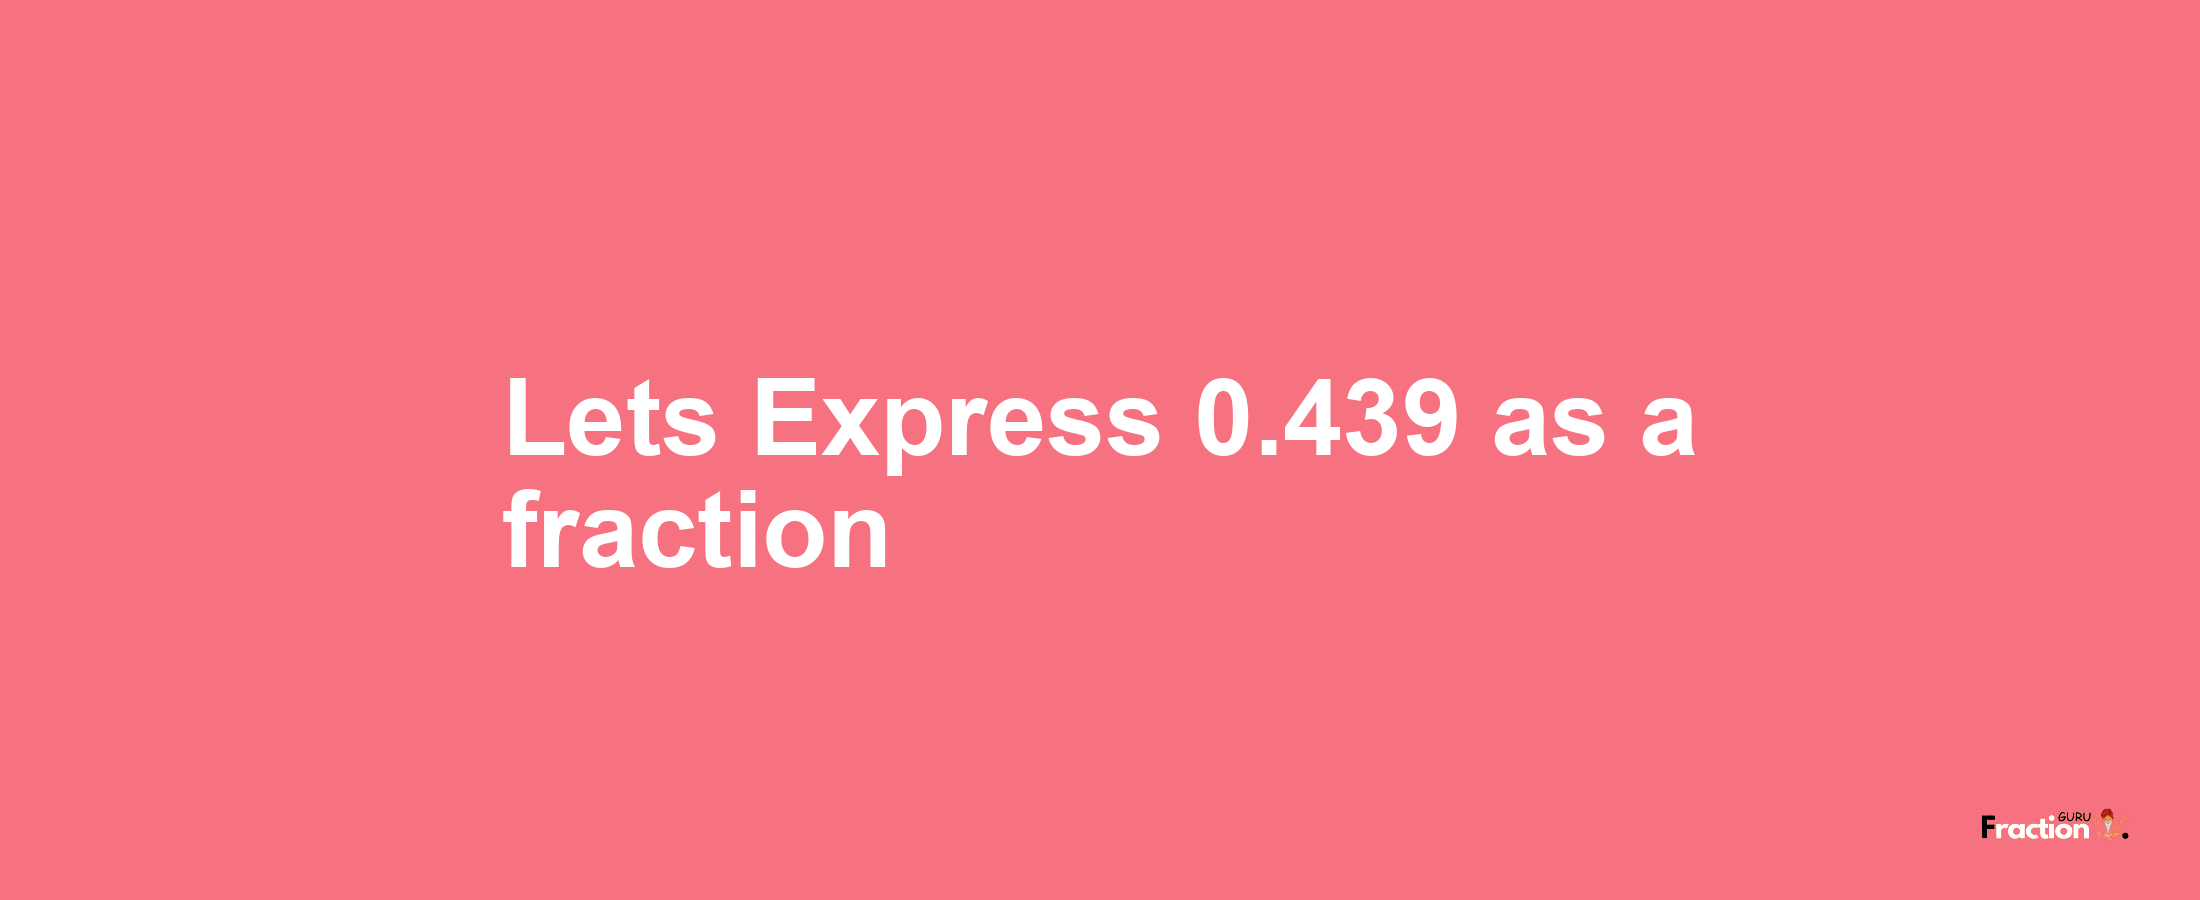 Lets Express 0.439 as afraction